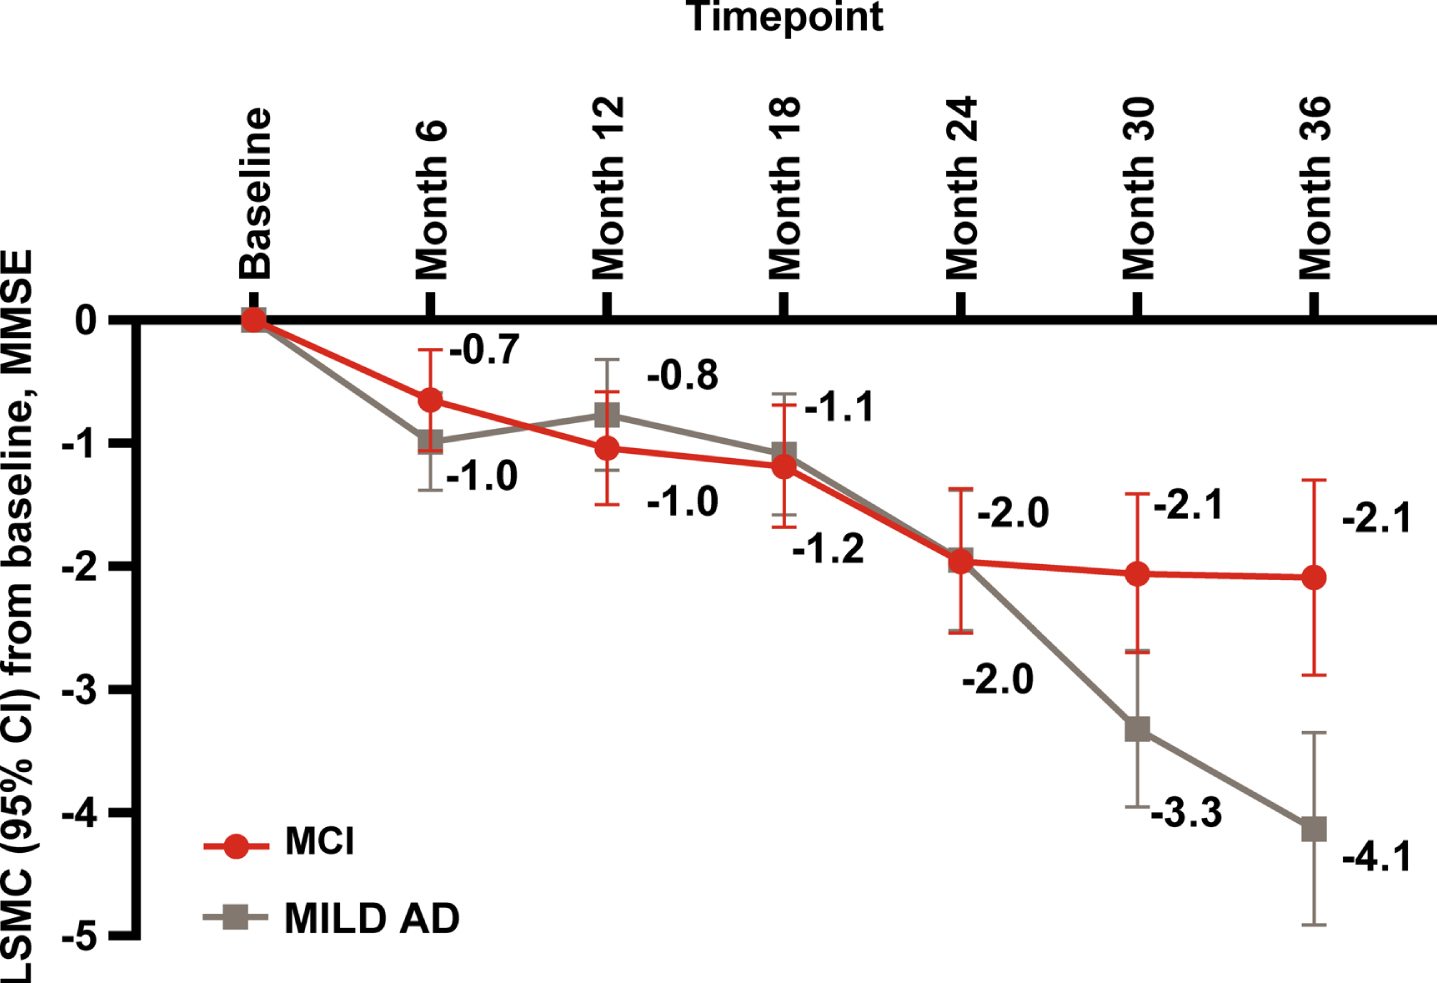 Disease progression measured by MMSE: LSMC baseline to 36 months. AD, Alzheimer’s disease; CI, confidence interval; MCI, mild cognitive impairment; MILD AD, mild dementia due to AD; LSMC, least squares mean change (from MMRM model); MMRM, mixed model repeated measures; MMSE, Mini-Mental State Examination. p≤0.001 at month 36, calculated from t-test for comparing MCI and MILD AD.